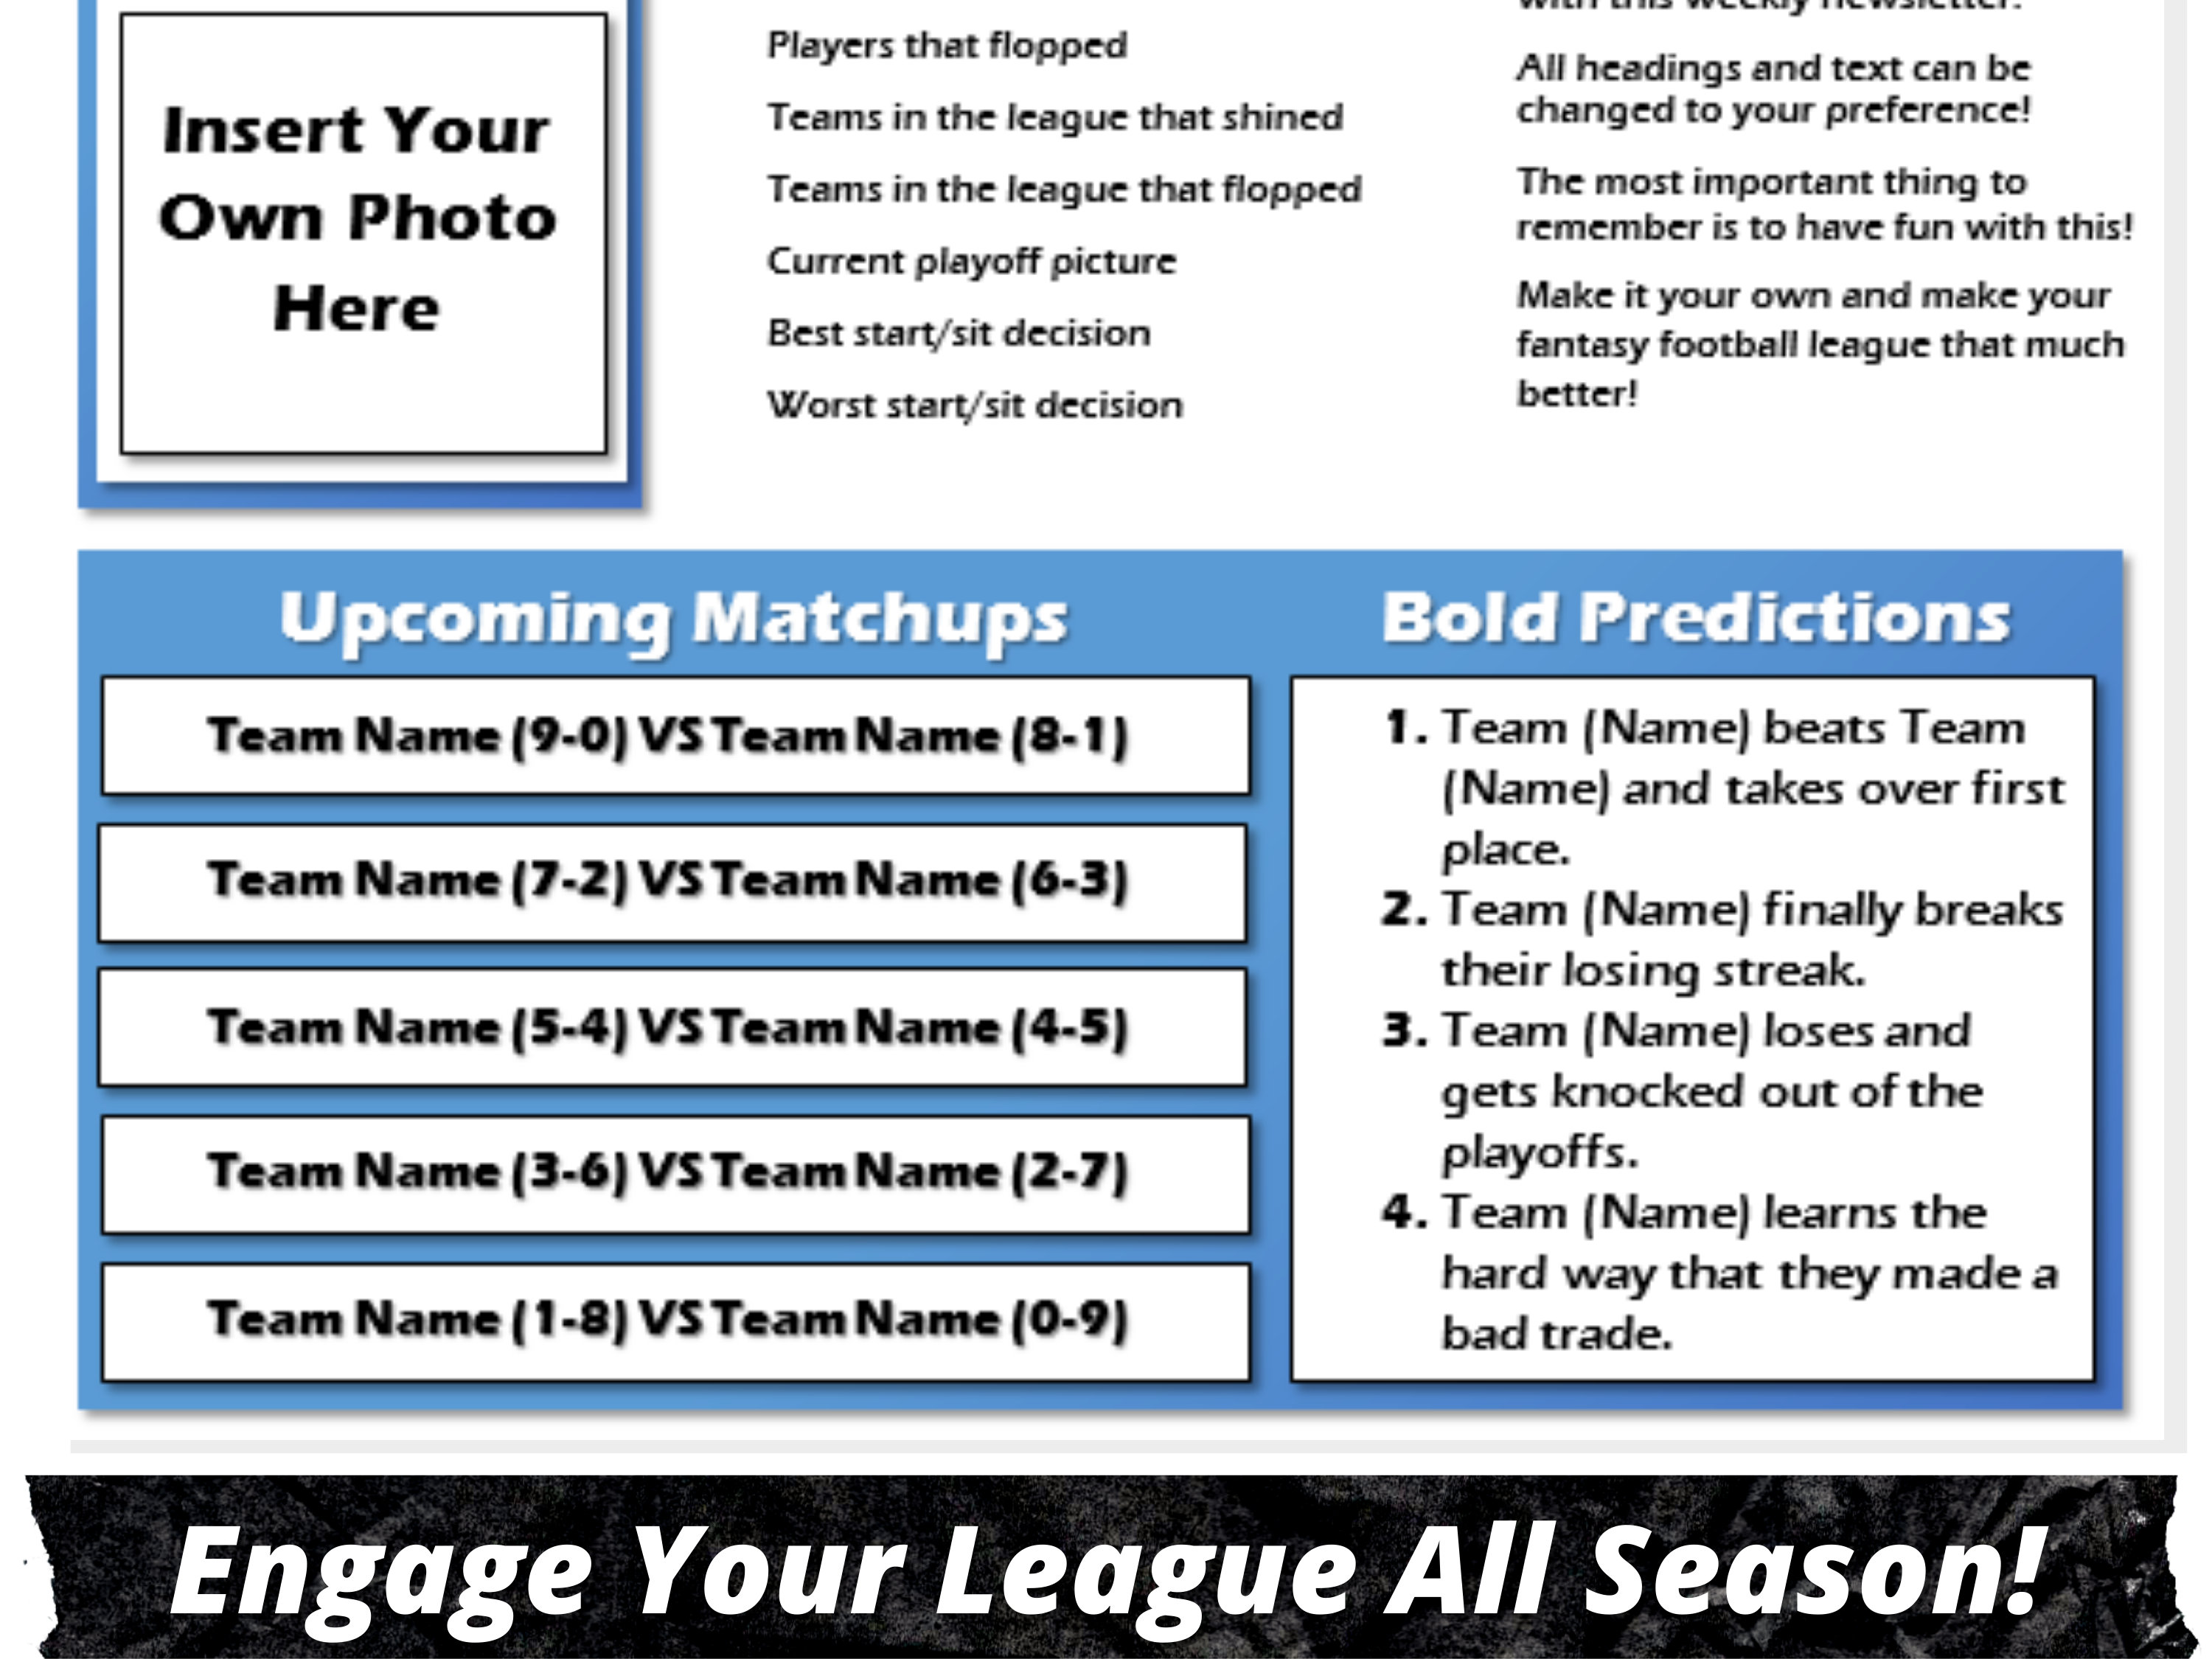 fantasy-football-newsletter-2-page-editable-template-etsy